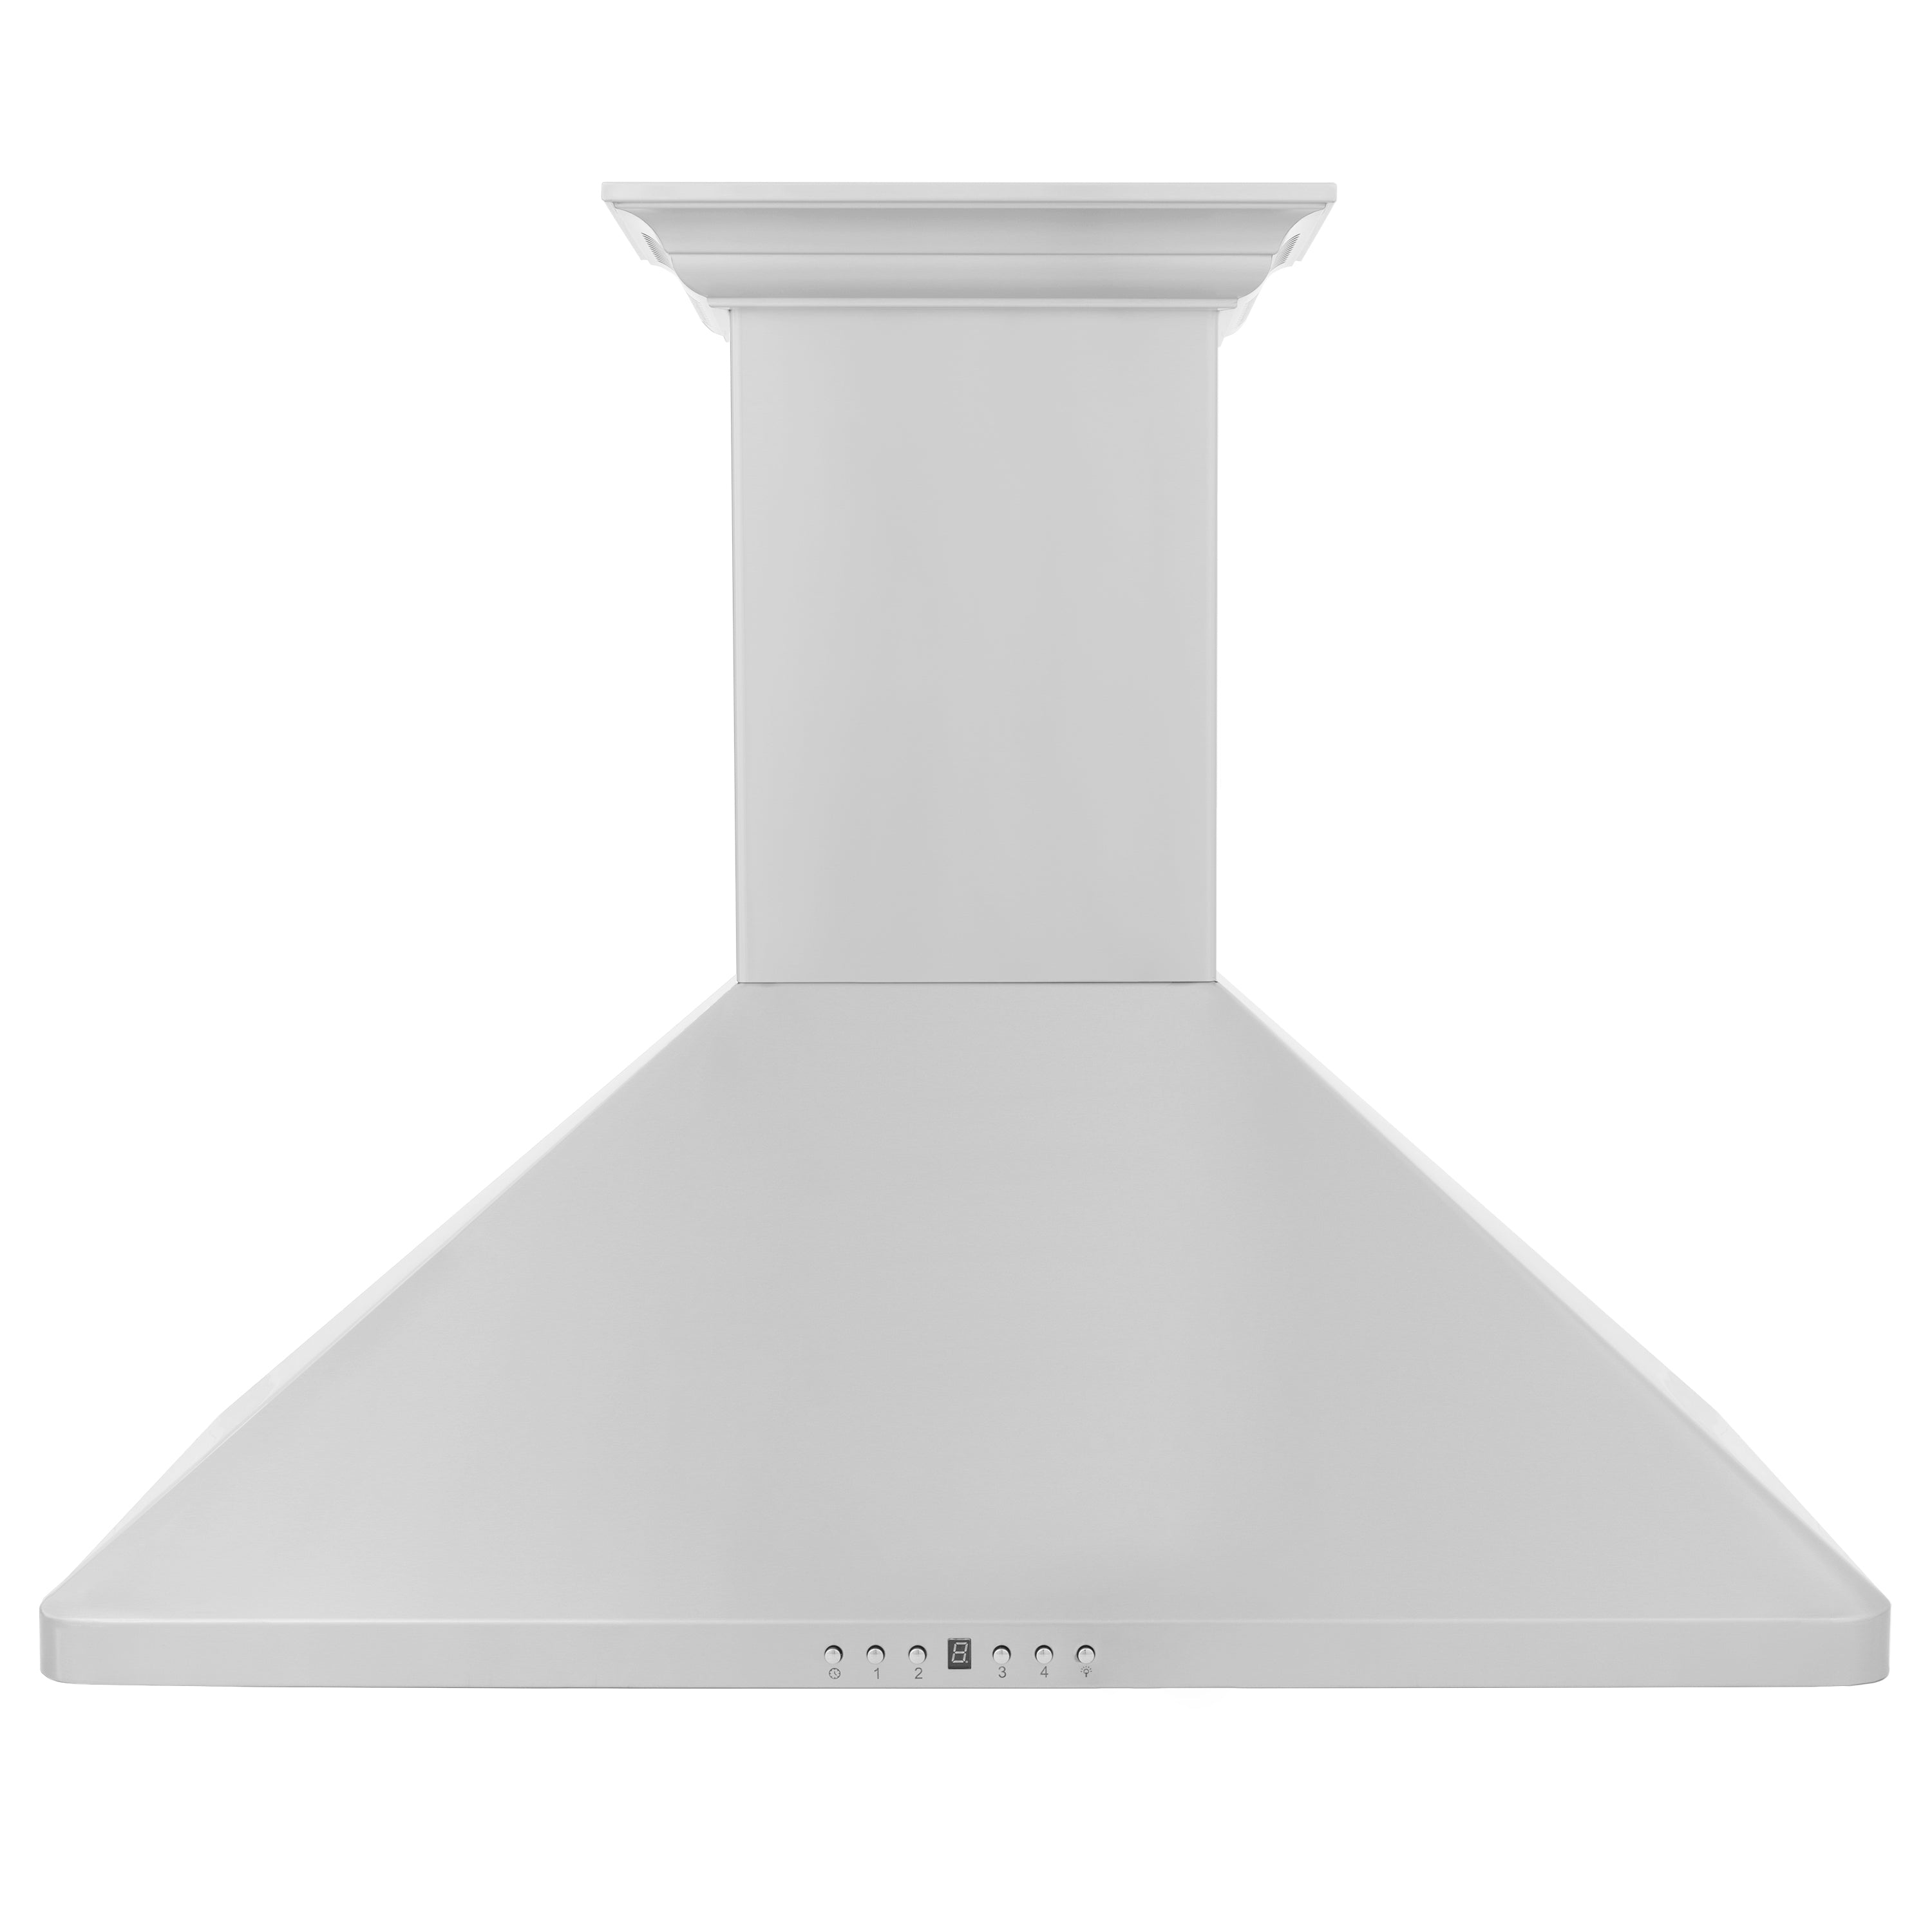 36" ZLINE CrownSound‚ Ducted Vent Wall Mount Range Hood in Stainless Steel with Built-in Bluetooth Speakers (KF1CRN-BT-36)